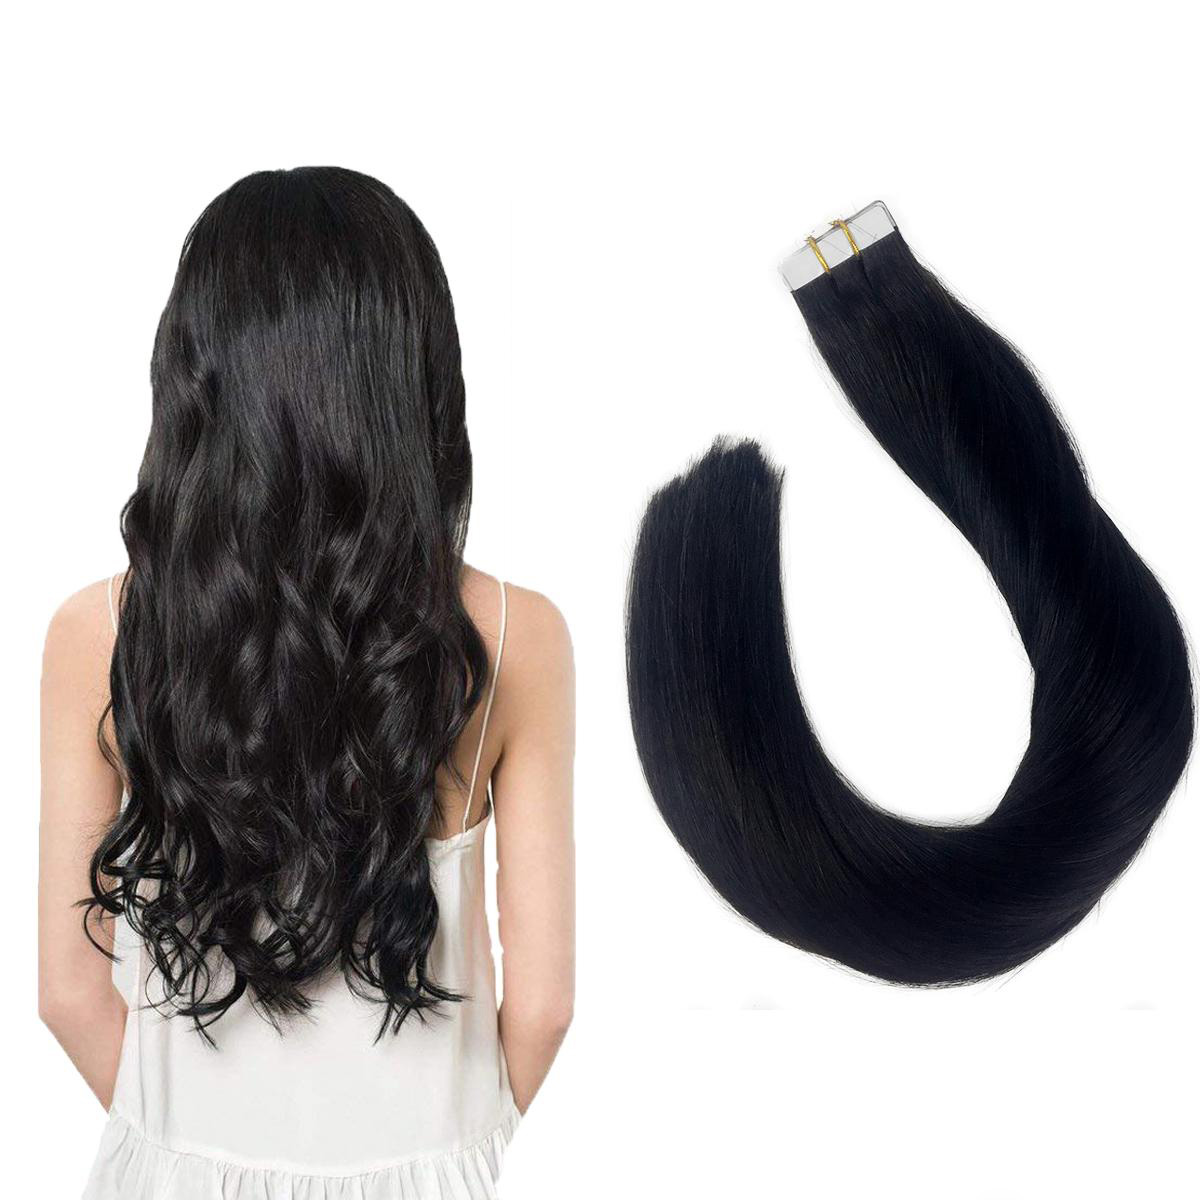 Tape Human Hair Extensions Wholesale - Weft Platinum Blonde Remy Hair Tape Human Hair Extensions Wholesale - Weft Platinum Blonde Remy Hair Tape Human Hair Extensions Wholesale